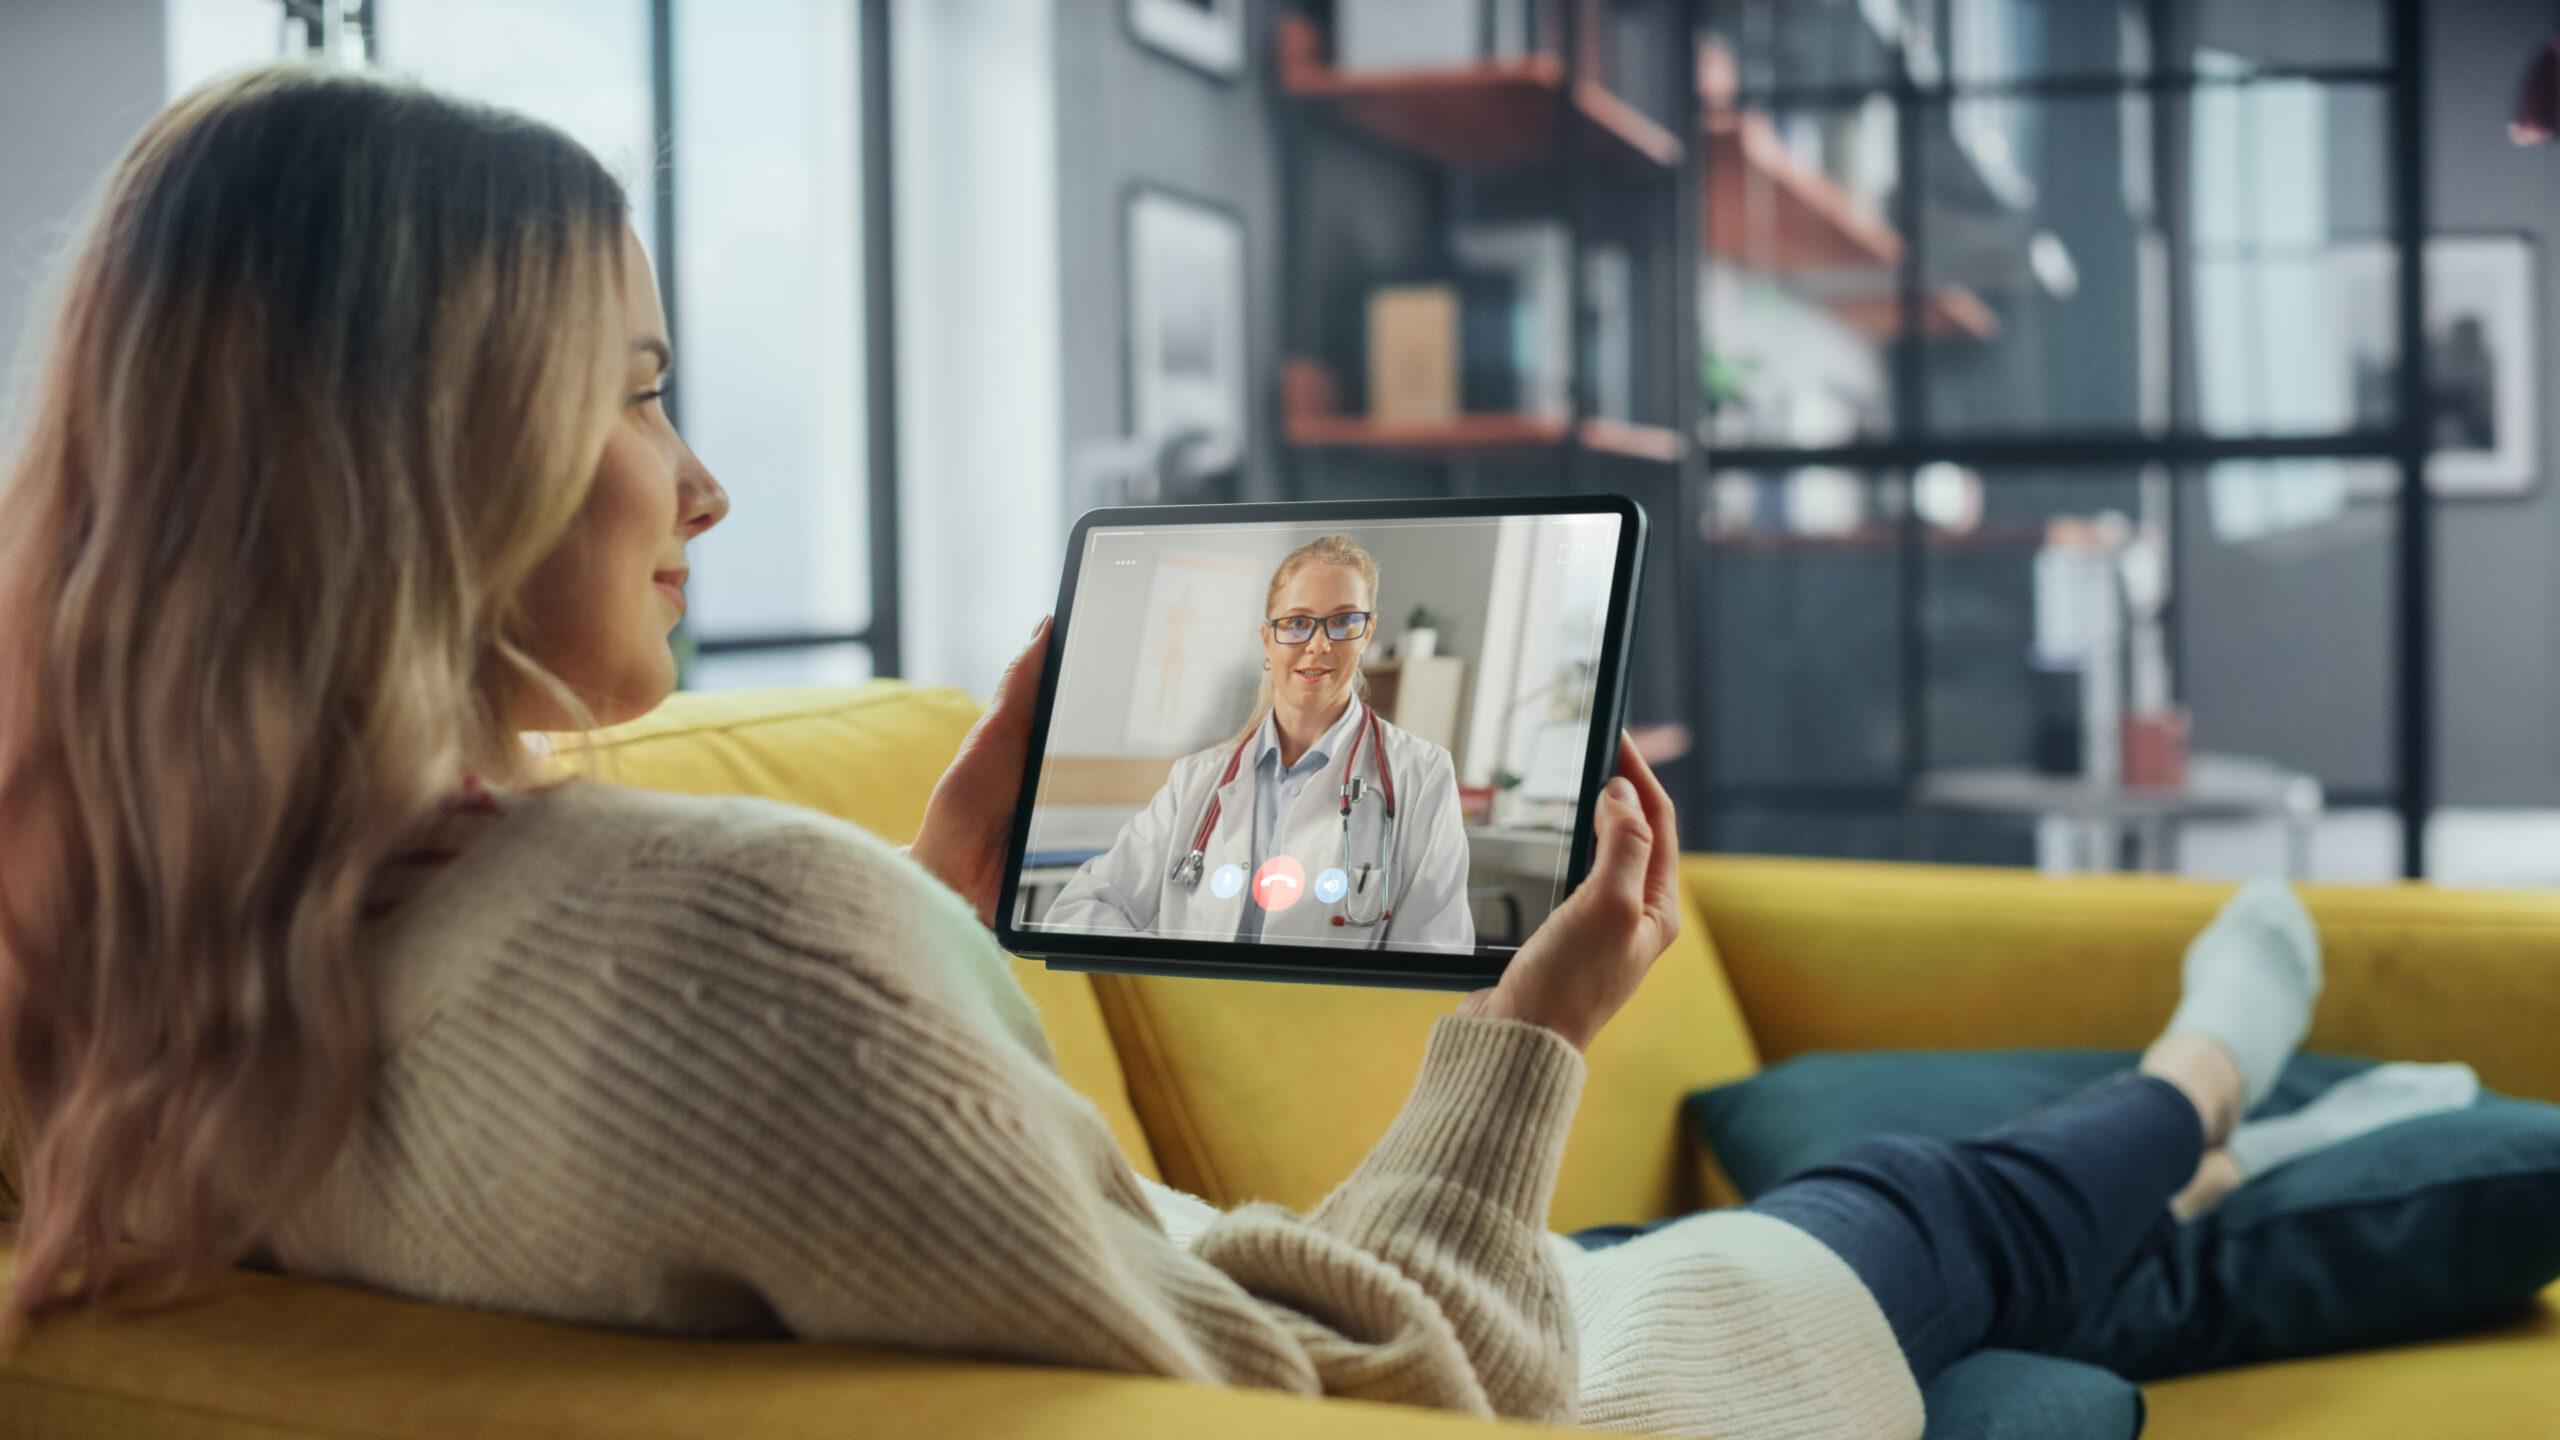 Woman on a couch holding a tablet on a video call with a health professional